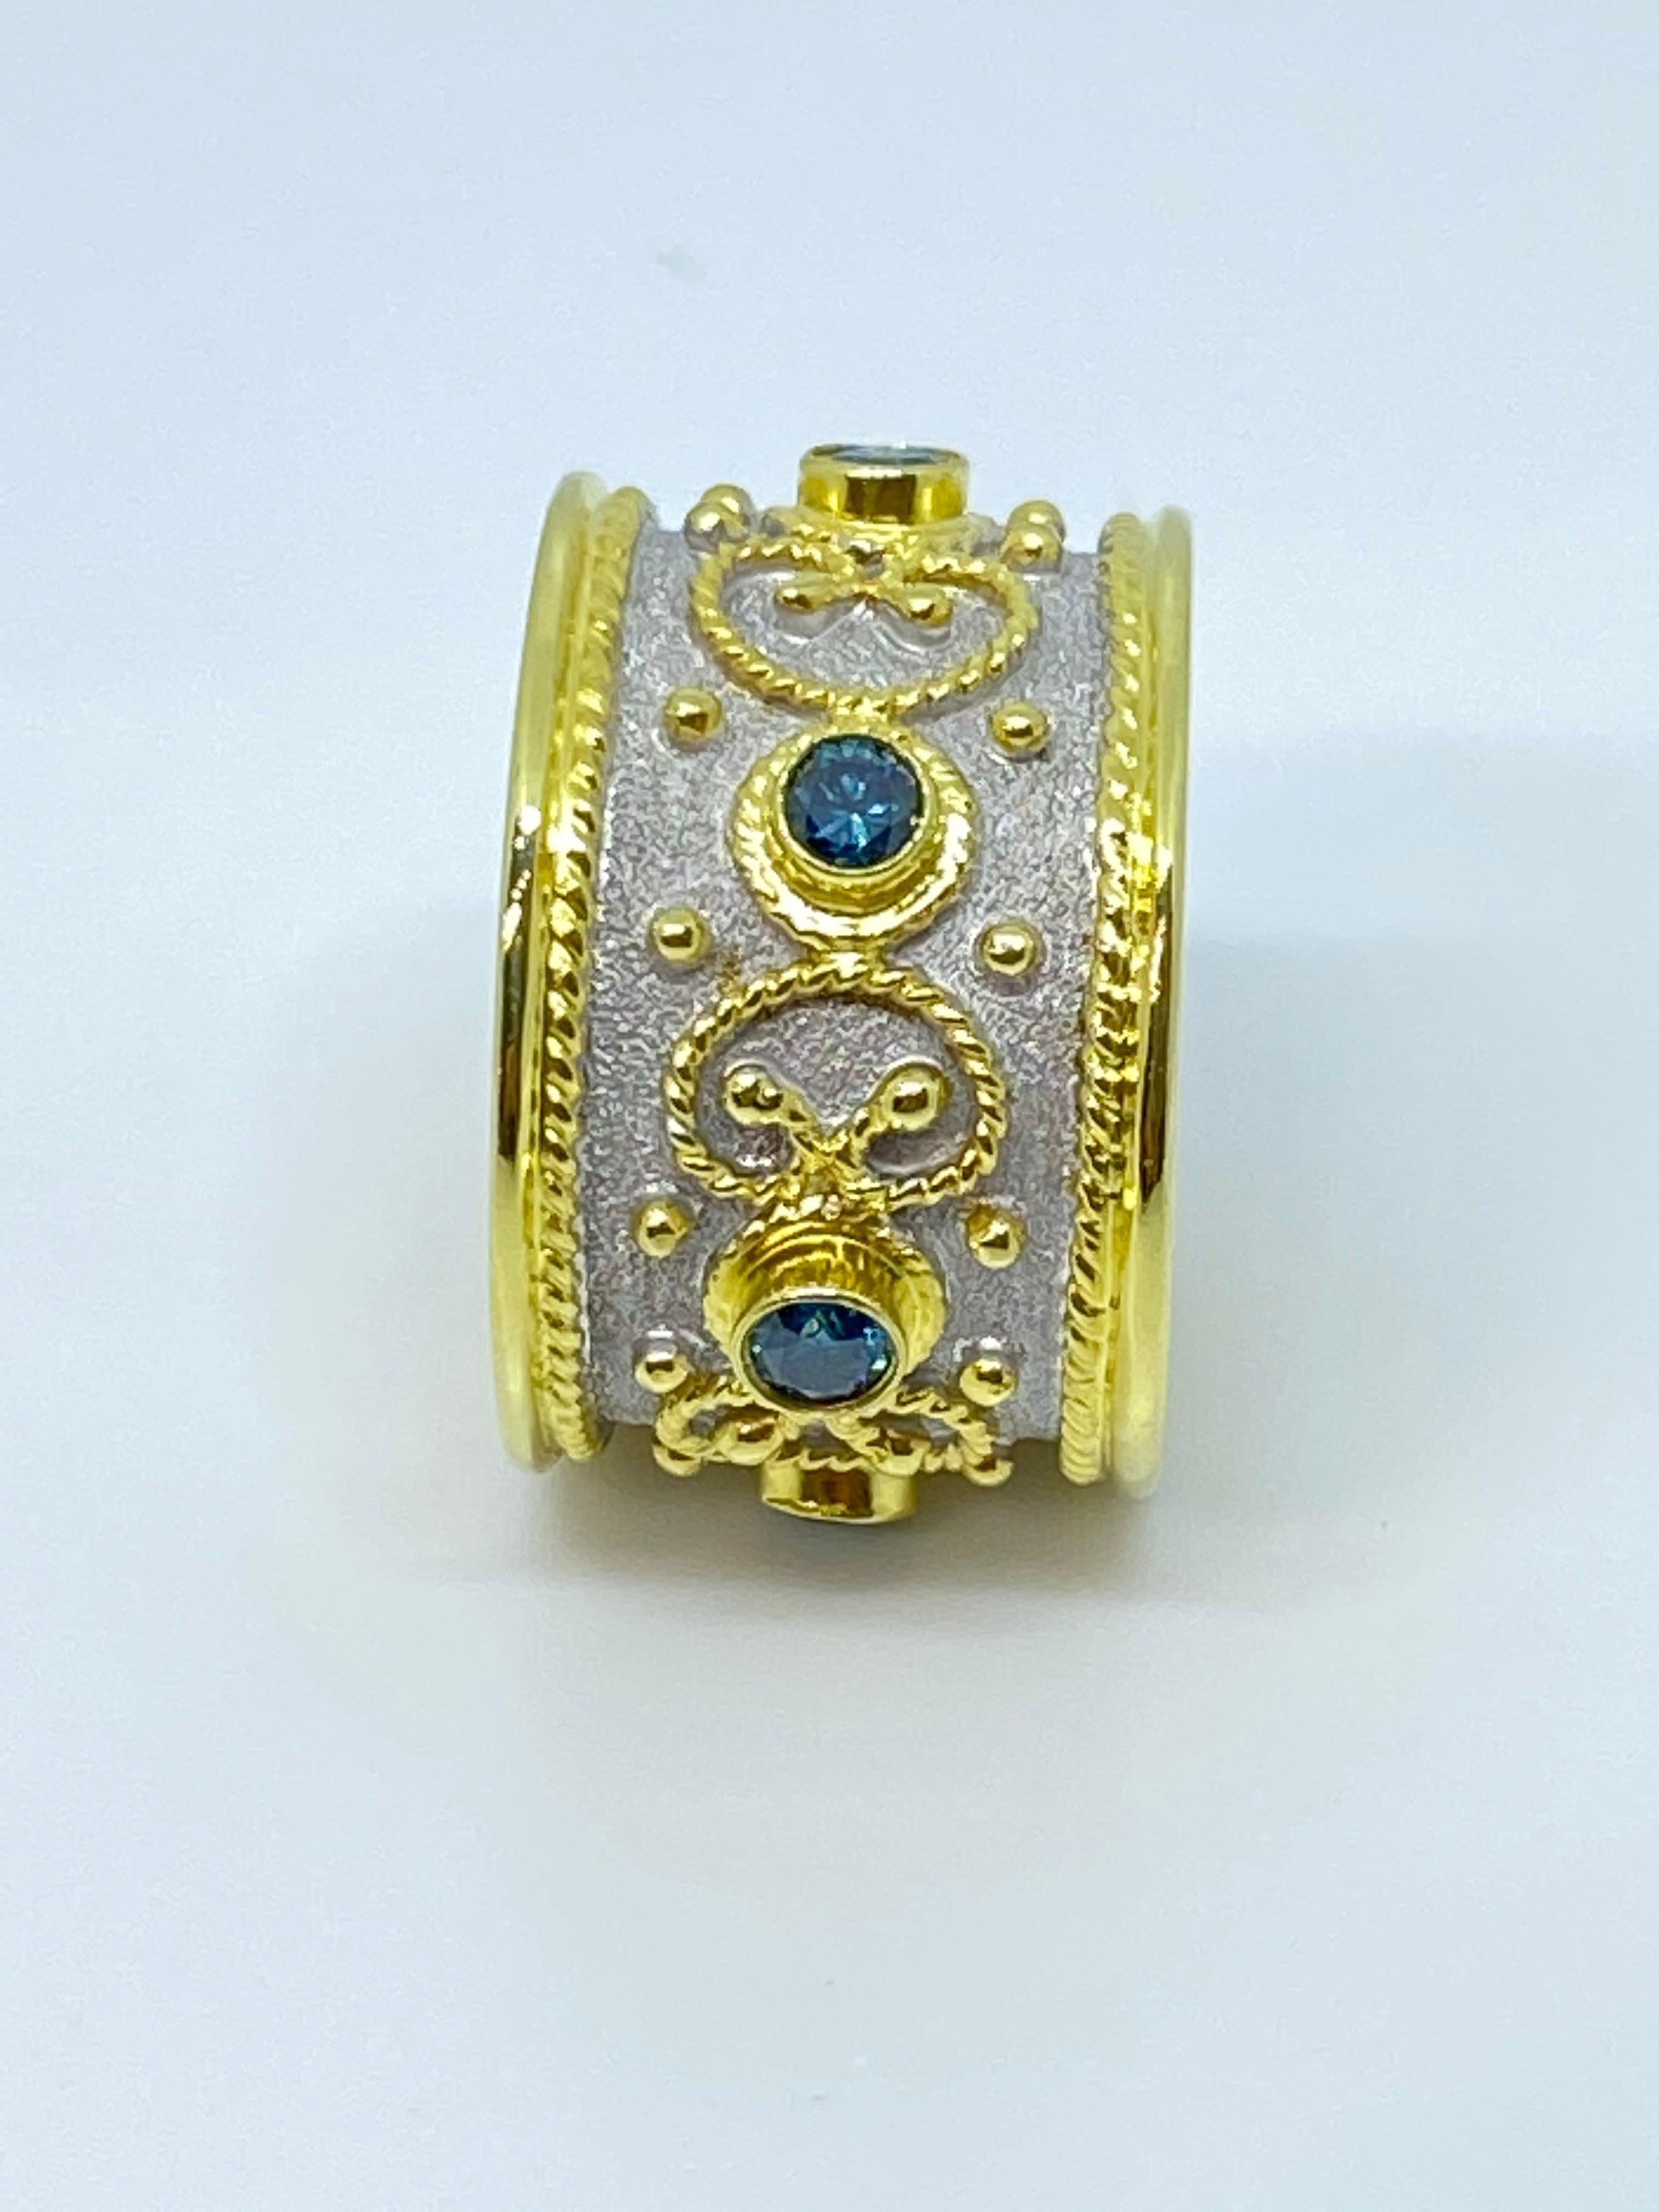 S.Georgios designer Diamond Band Ring is handmade from solid 18 Karat Yellow Gold. The beautiful Yellow Gold Band ring is microscopically decorated all the way around with Yellow Gold bead and wire granulation -with the Omega, the last letter of the